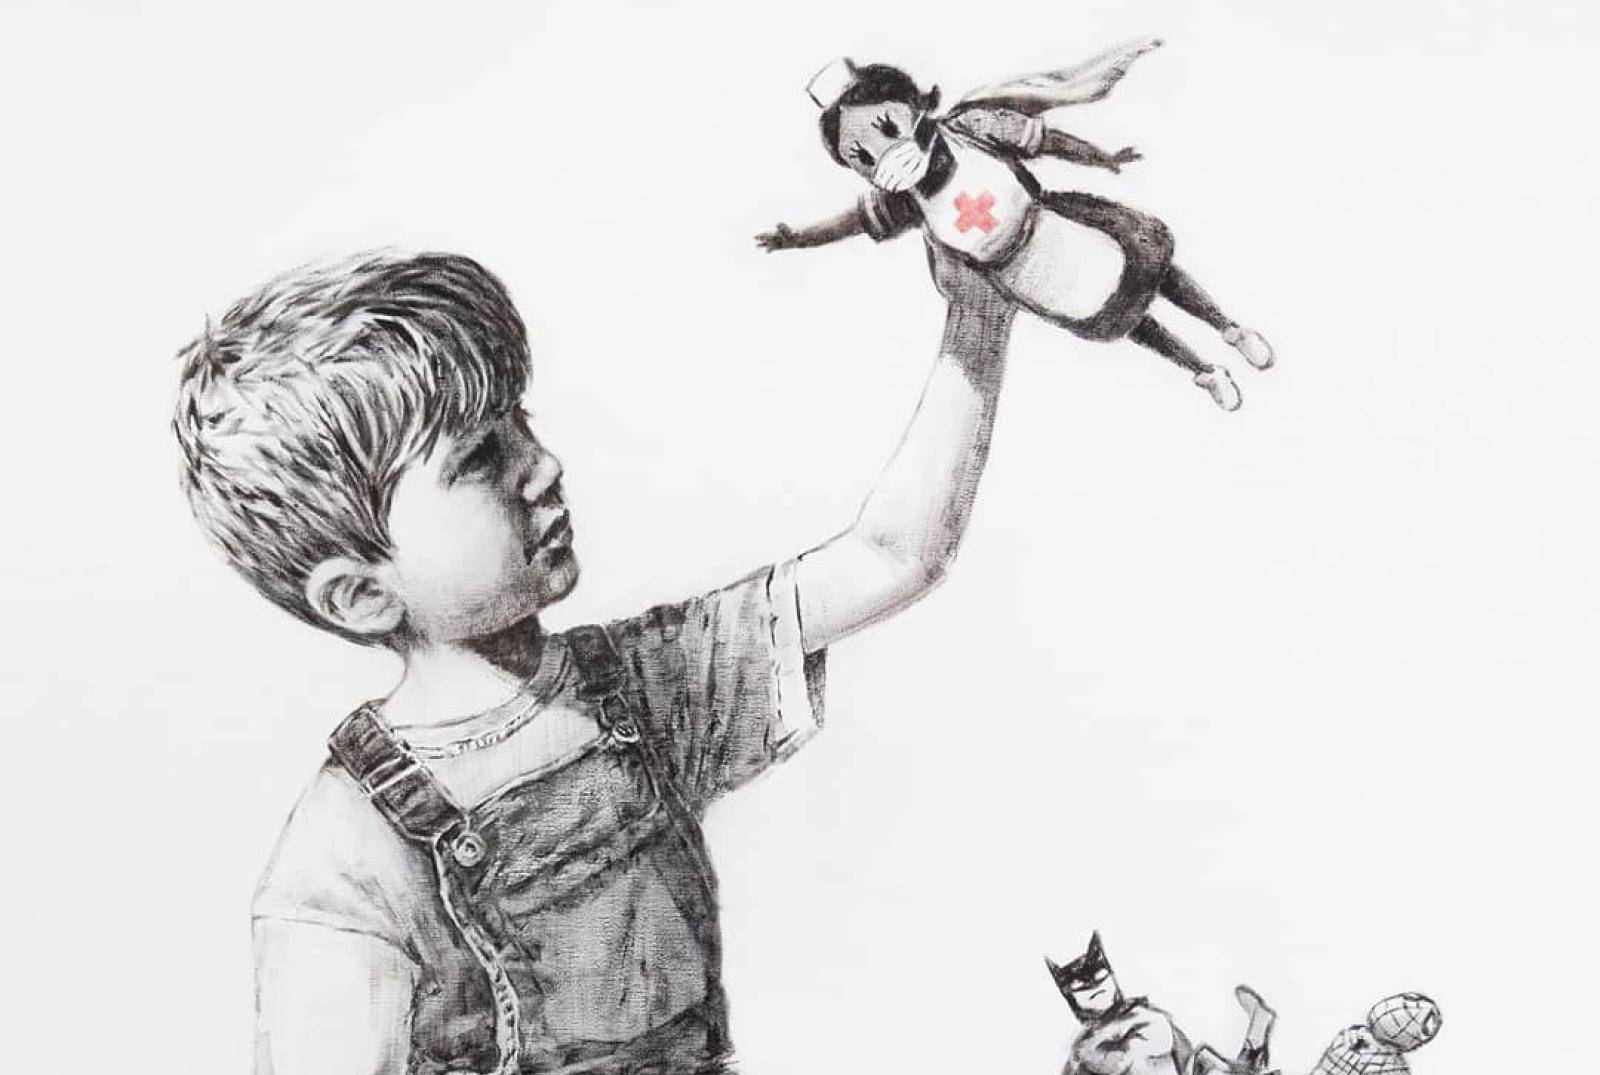 A picture shows a drawing created by the street artist Banksy called "Game Changer" as an appreciation for the NHS and is on display at Southampton General Hospital, in Southampton